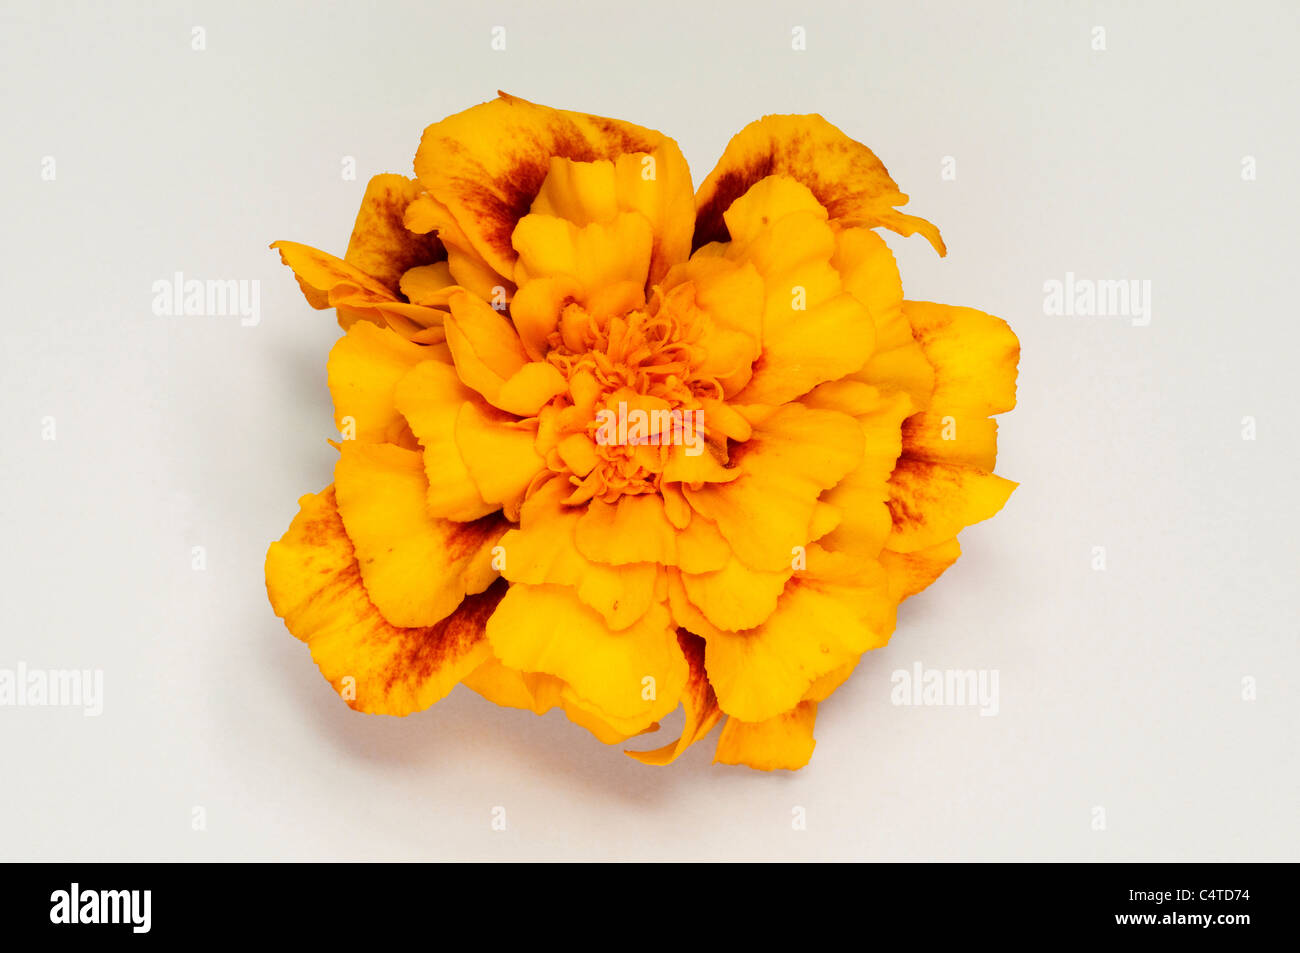 Tagetes, Marigold (Tagetes hybrid), flower head. Studio picture against a white background. Stock Photo